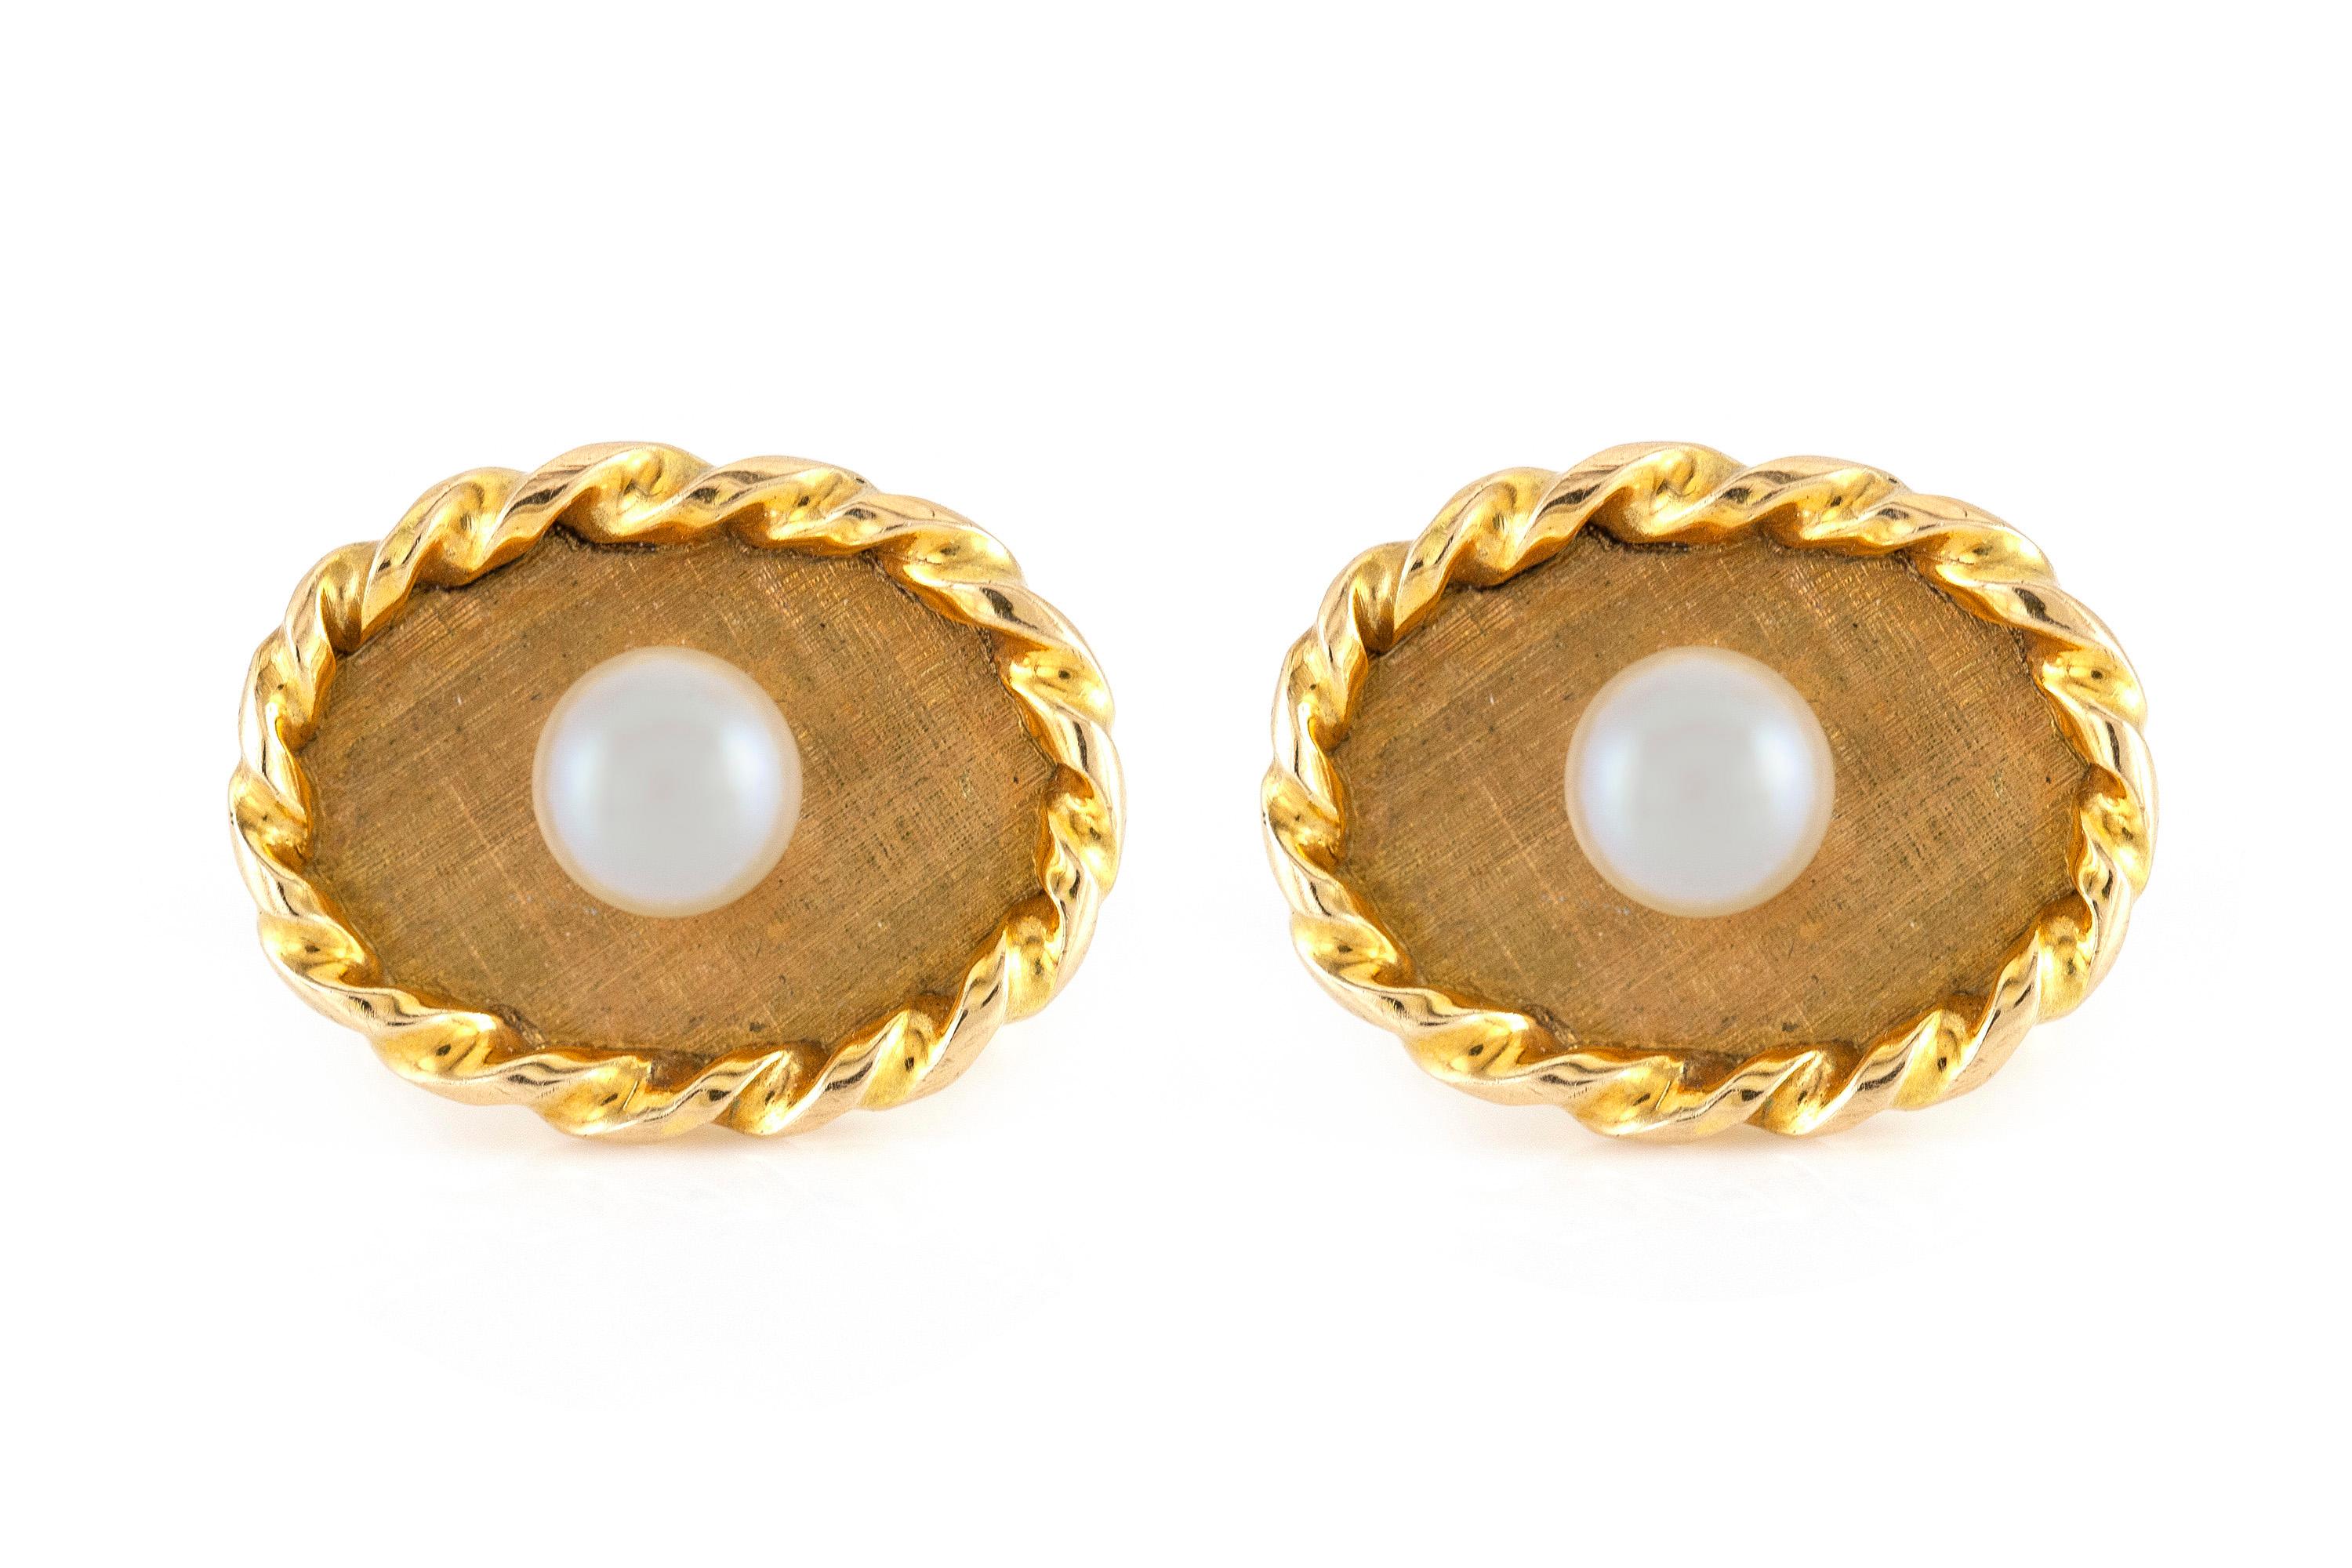 Pearl Oval Gold Cufflinks In Excellent Condition For Sale In New York, NY